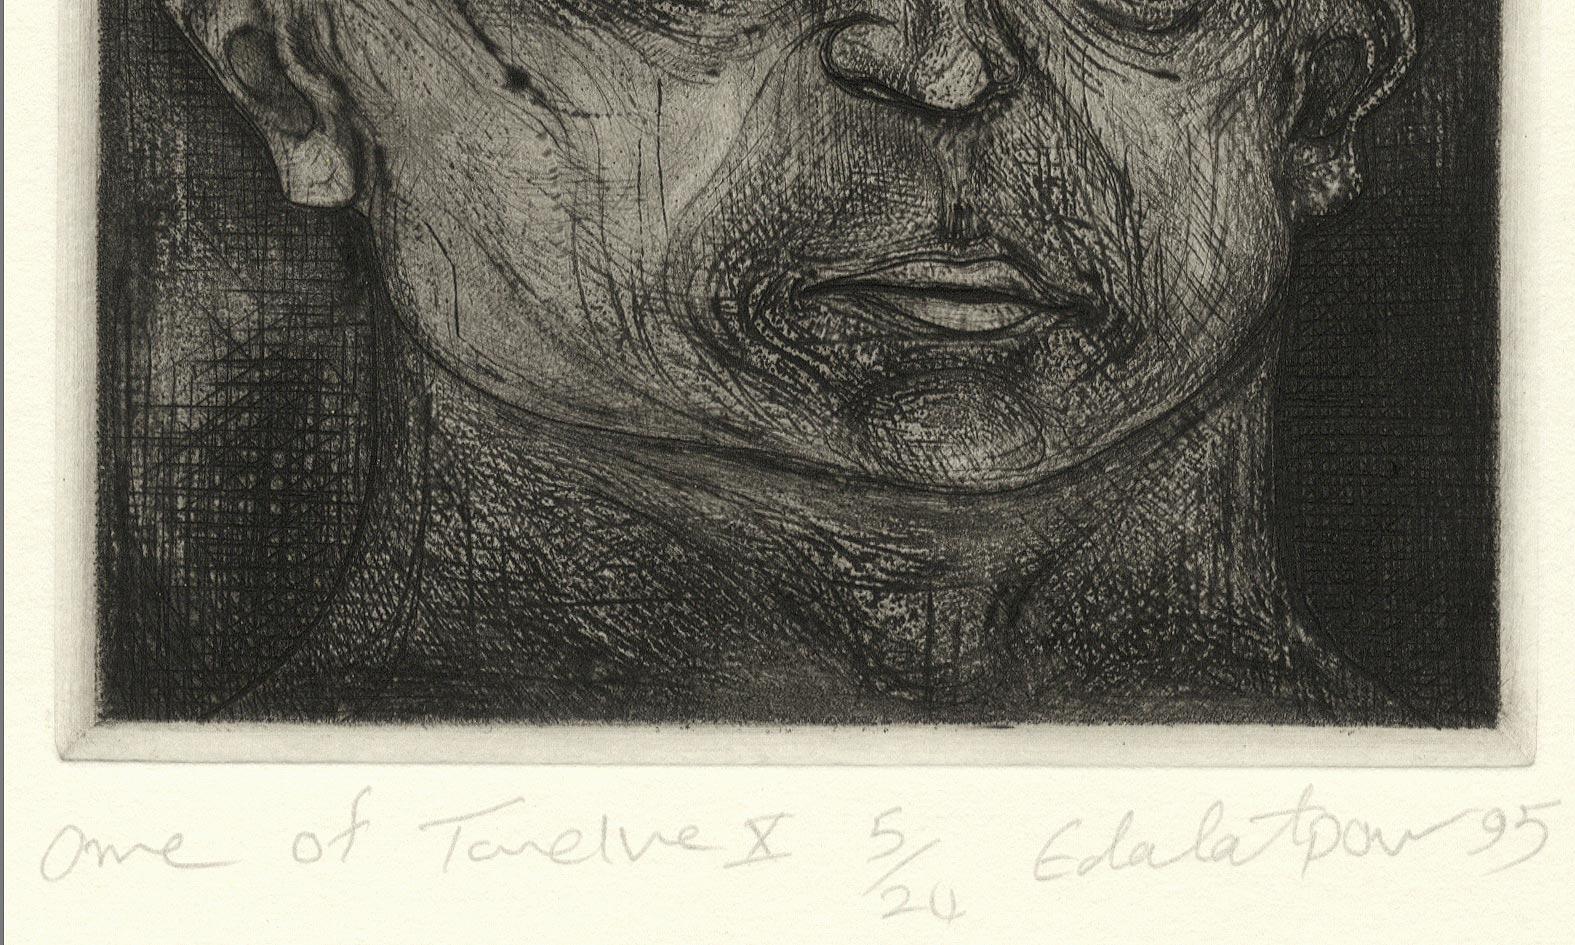 One of Twelve X (etchings of one of 12 heads based on  monumental sculpture) - Print by Seyed M. S. Edalatpour